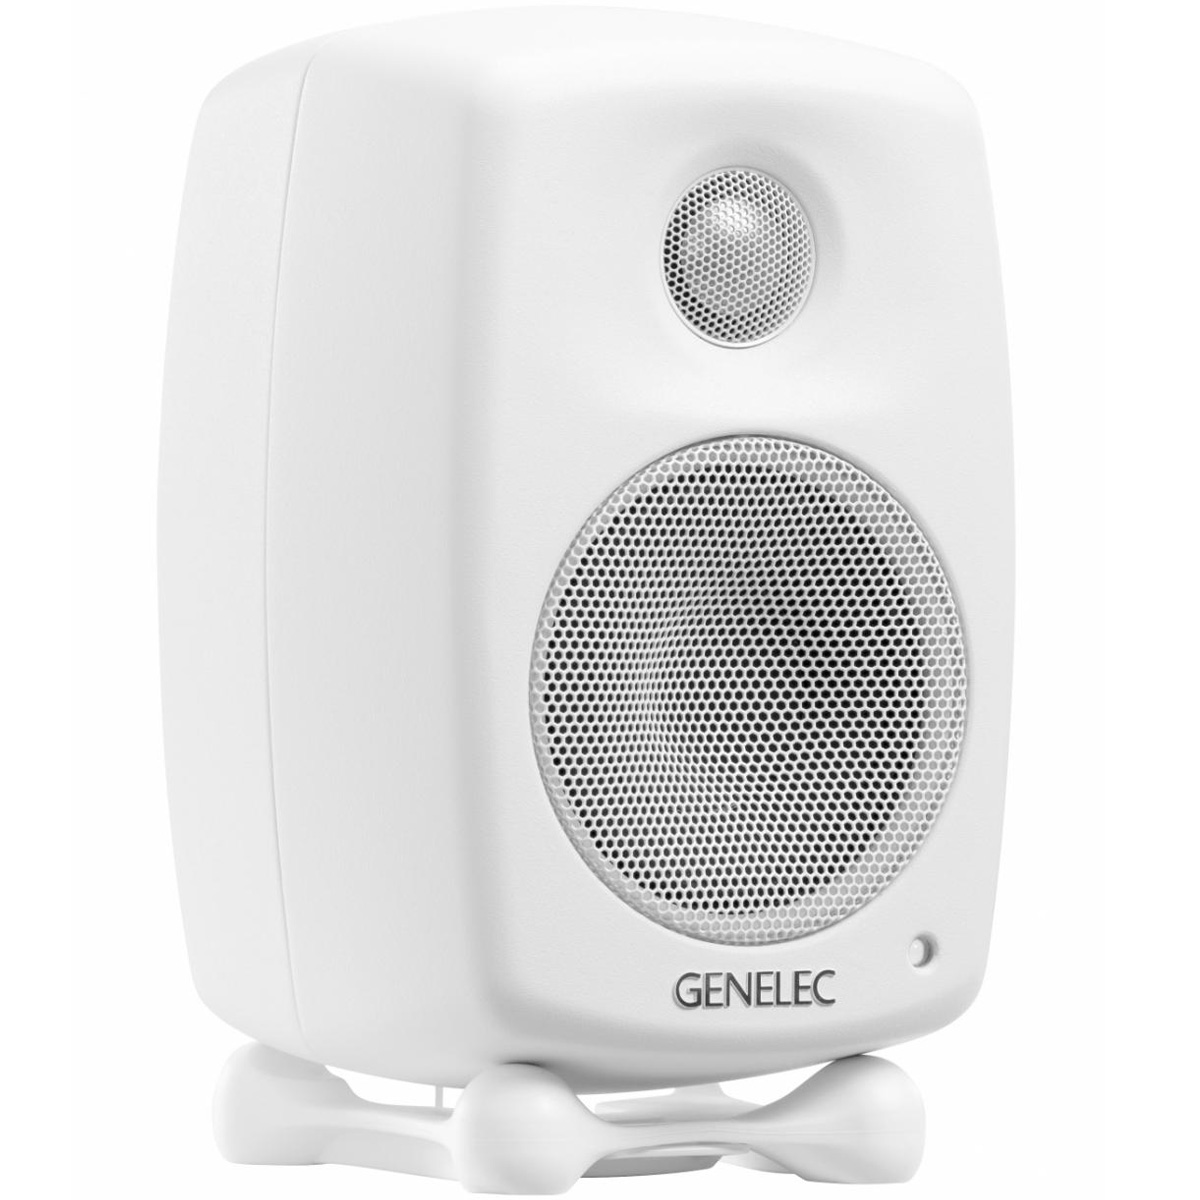 GENELEC ジェネレック G One Systems Home ホワイト (ペア) Audio PA